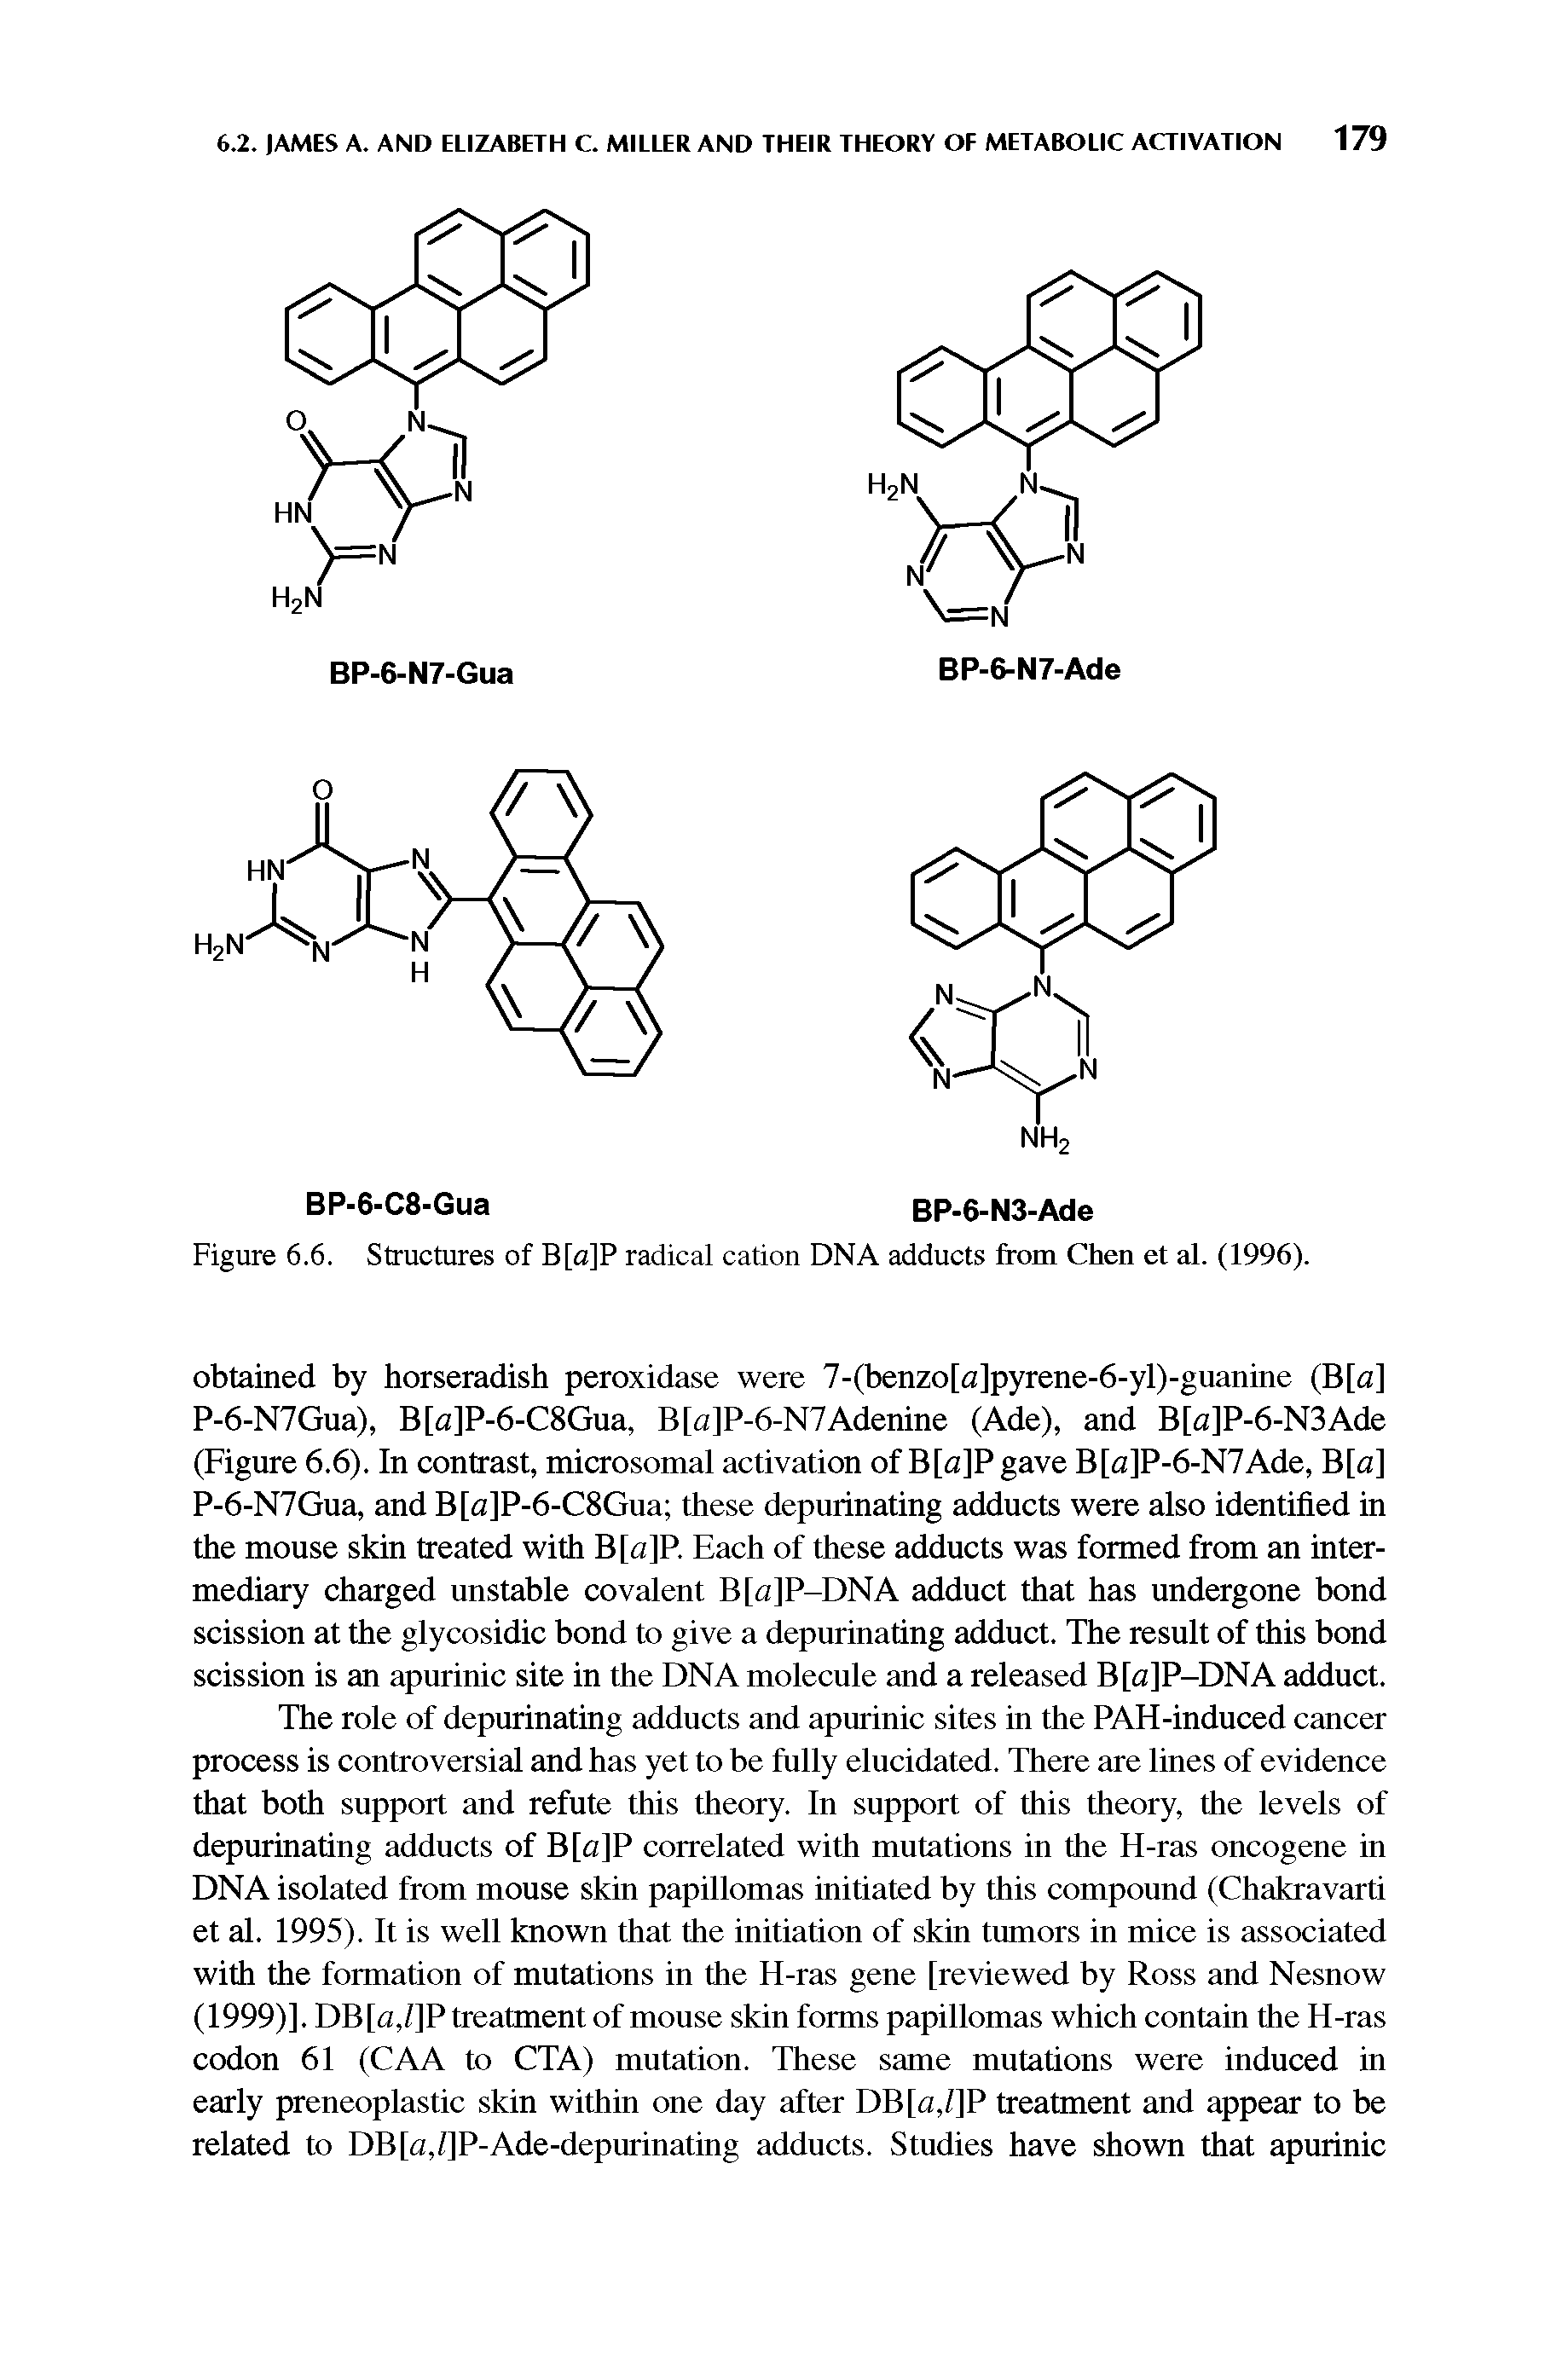 Figure 6.6. Structures of B[a]P radical cation DNA adducts from Chen et al. (1996).